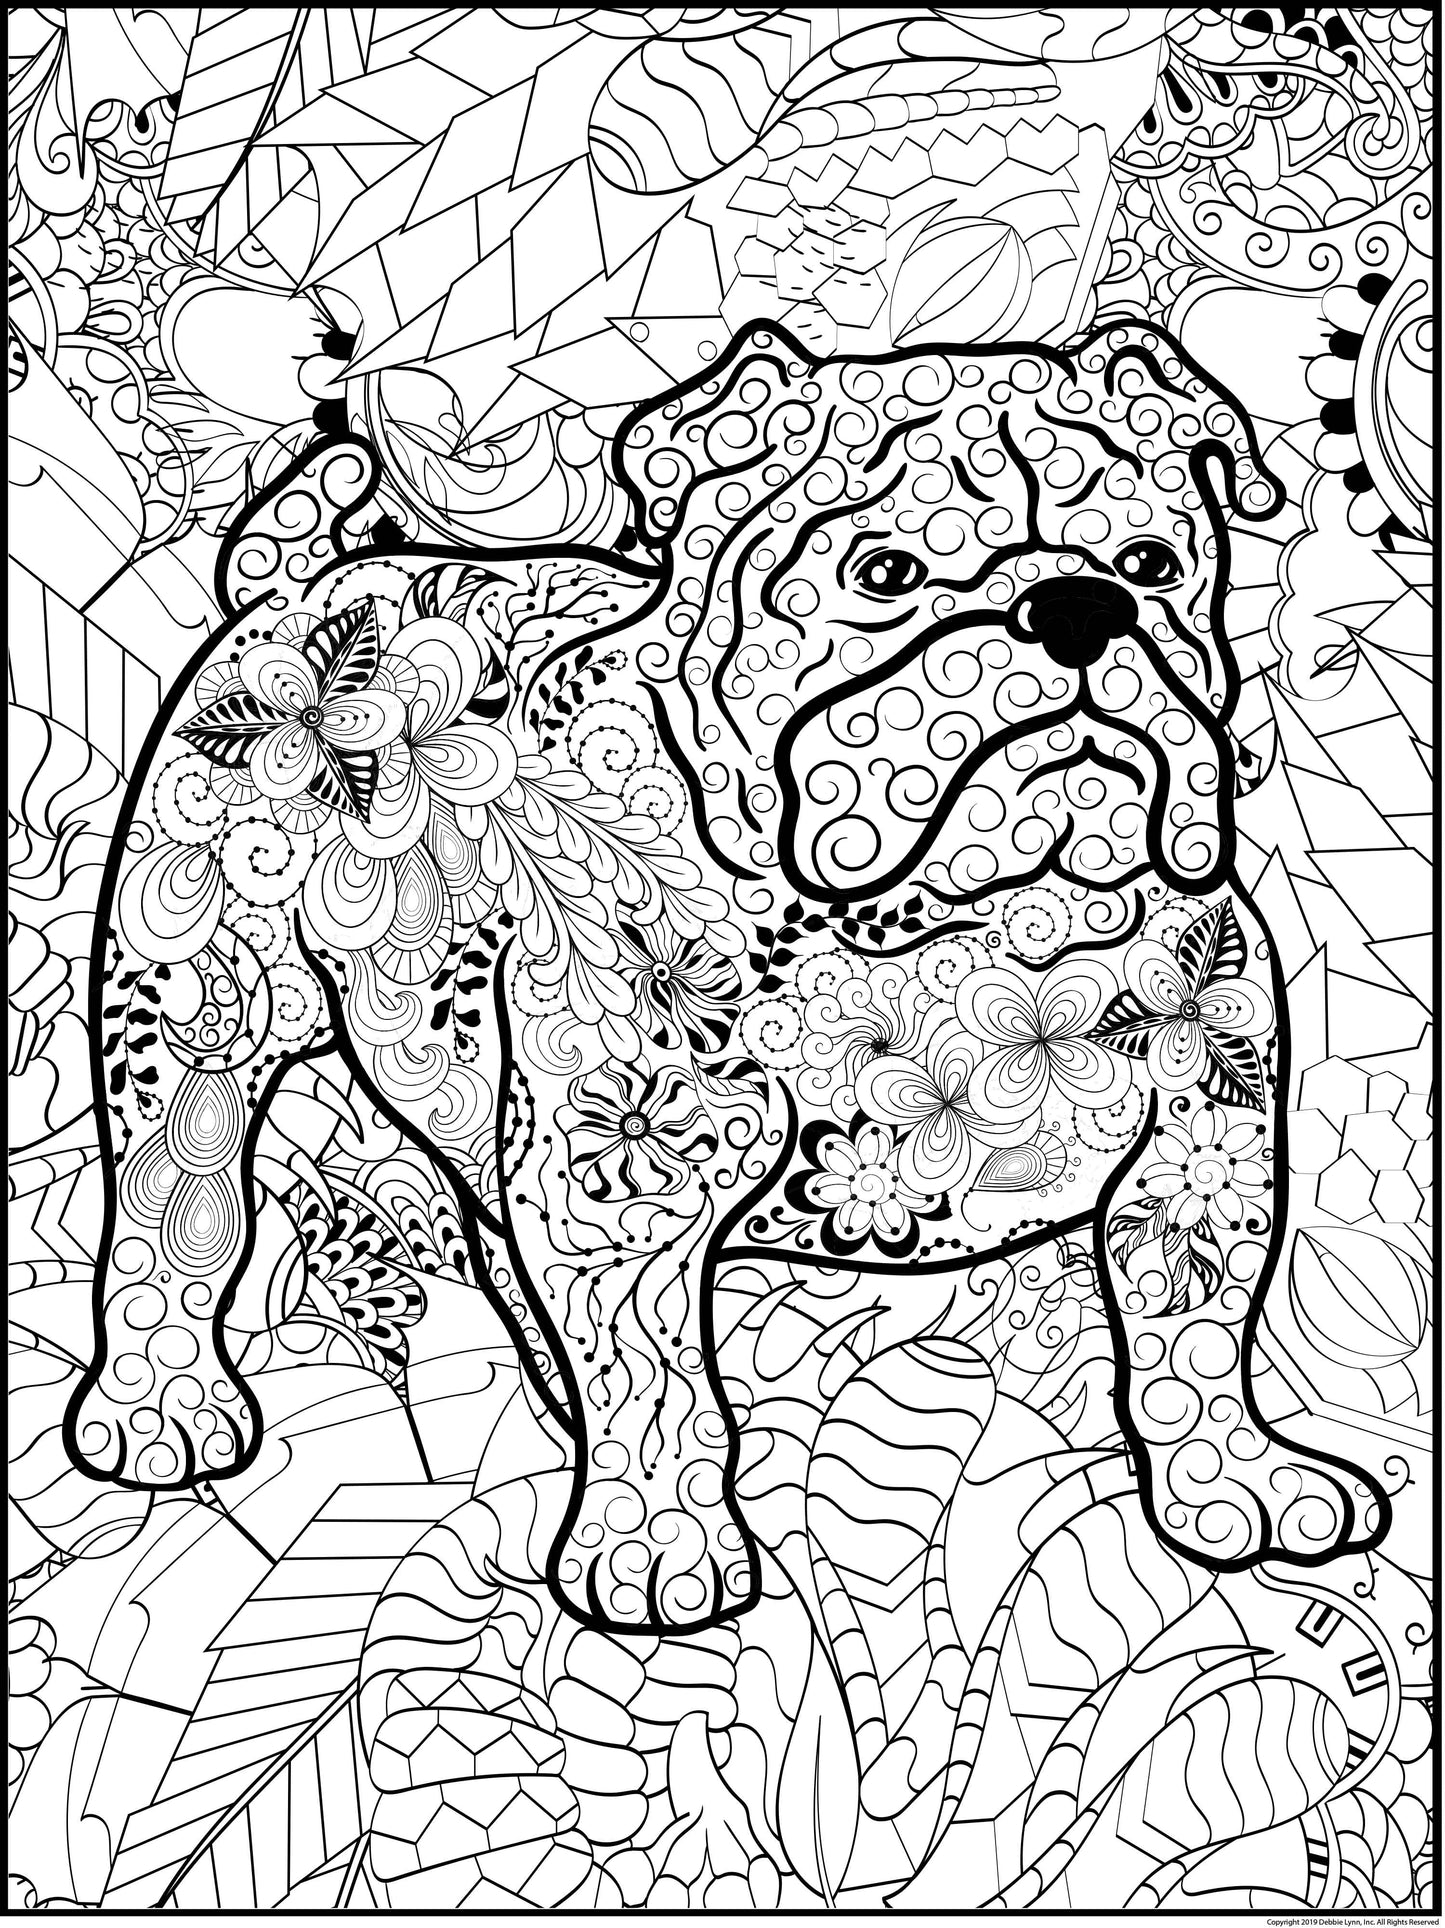 Debbie Lynn Rolled Coloring Posters 36x48 inches  | Choose from 30 Designs